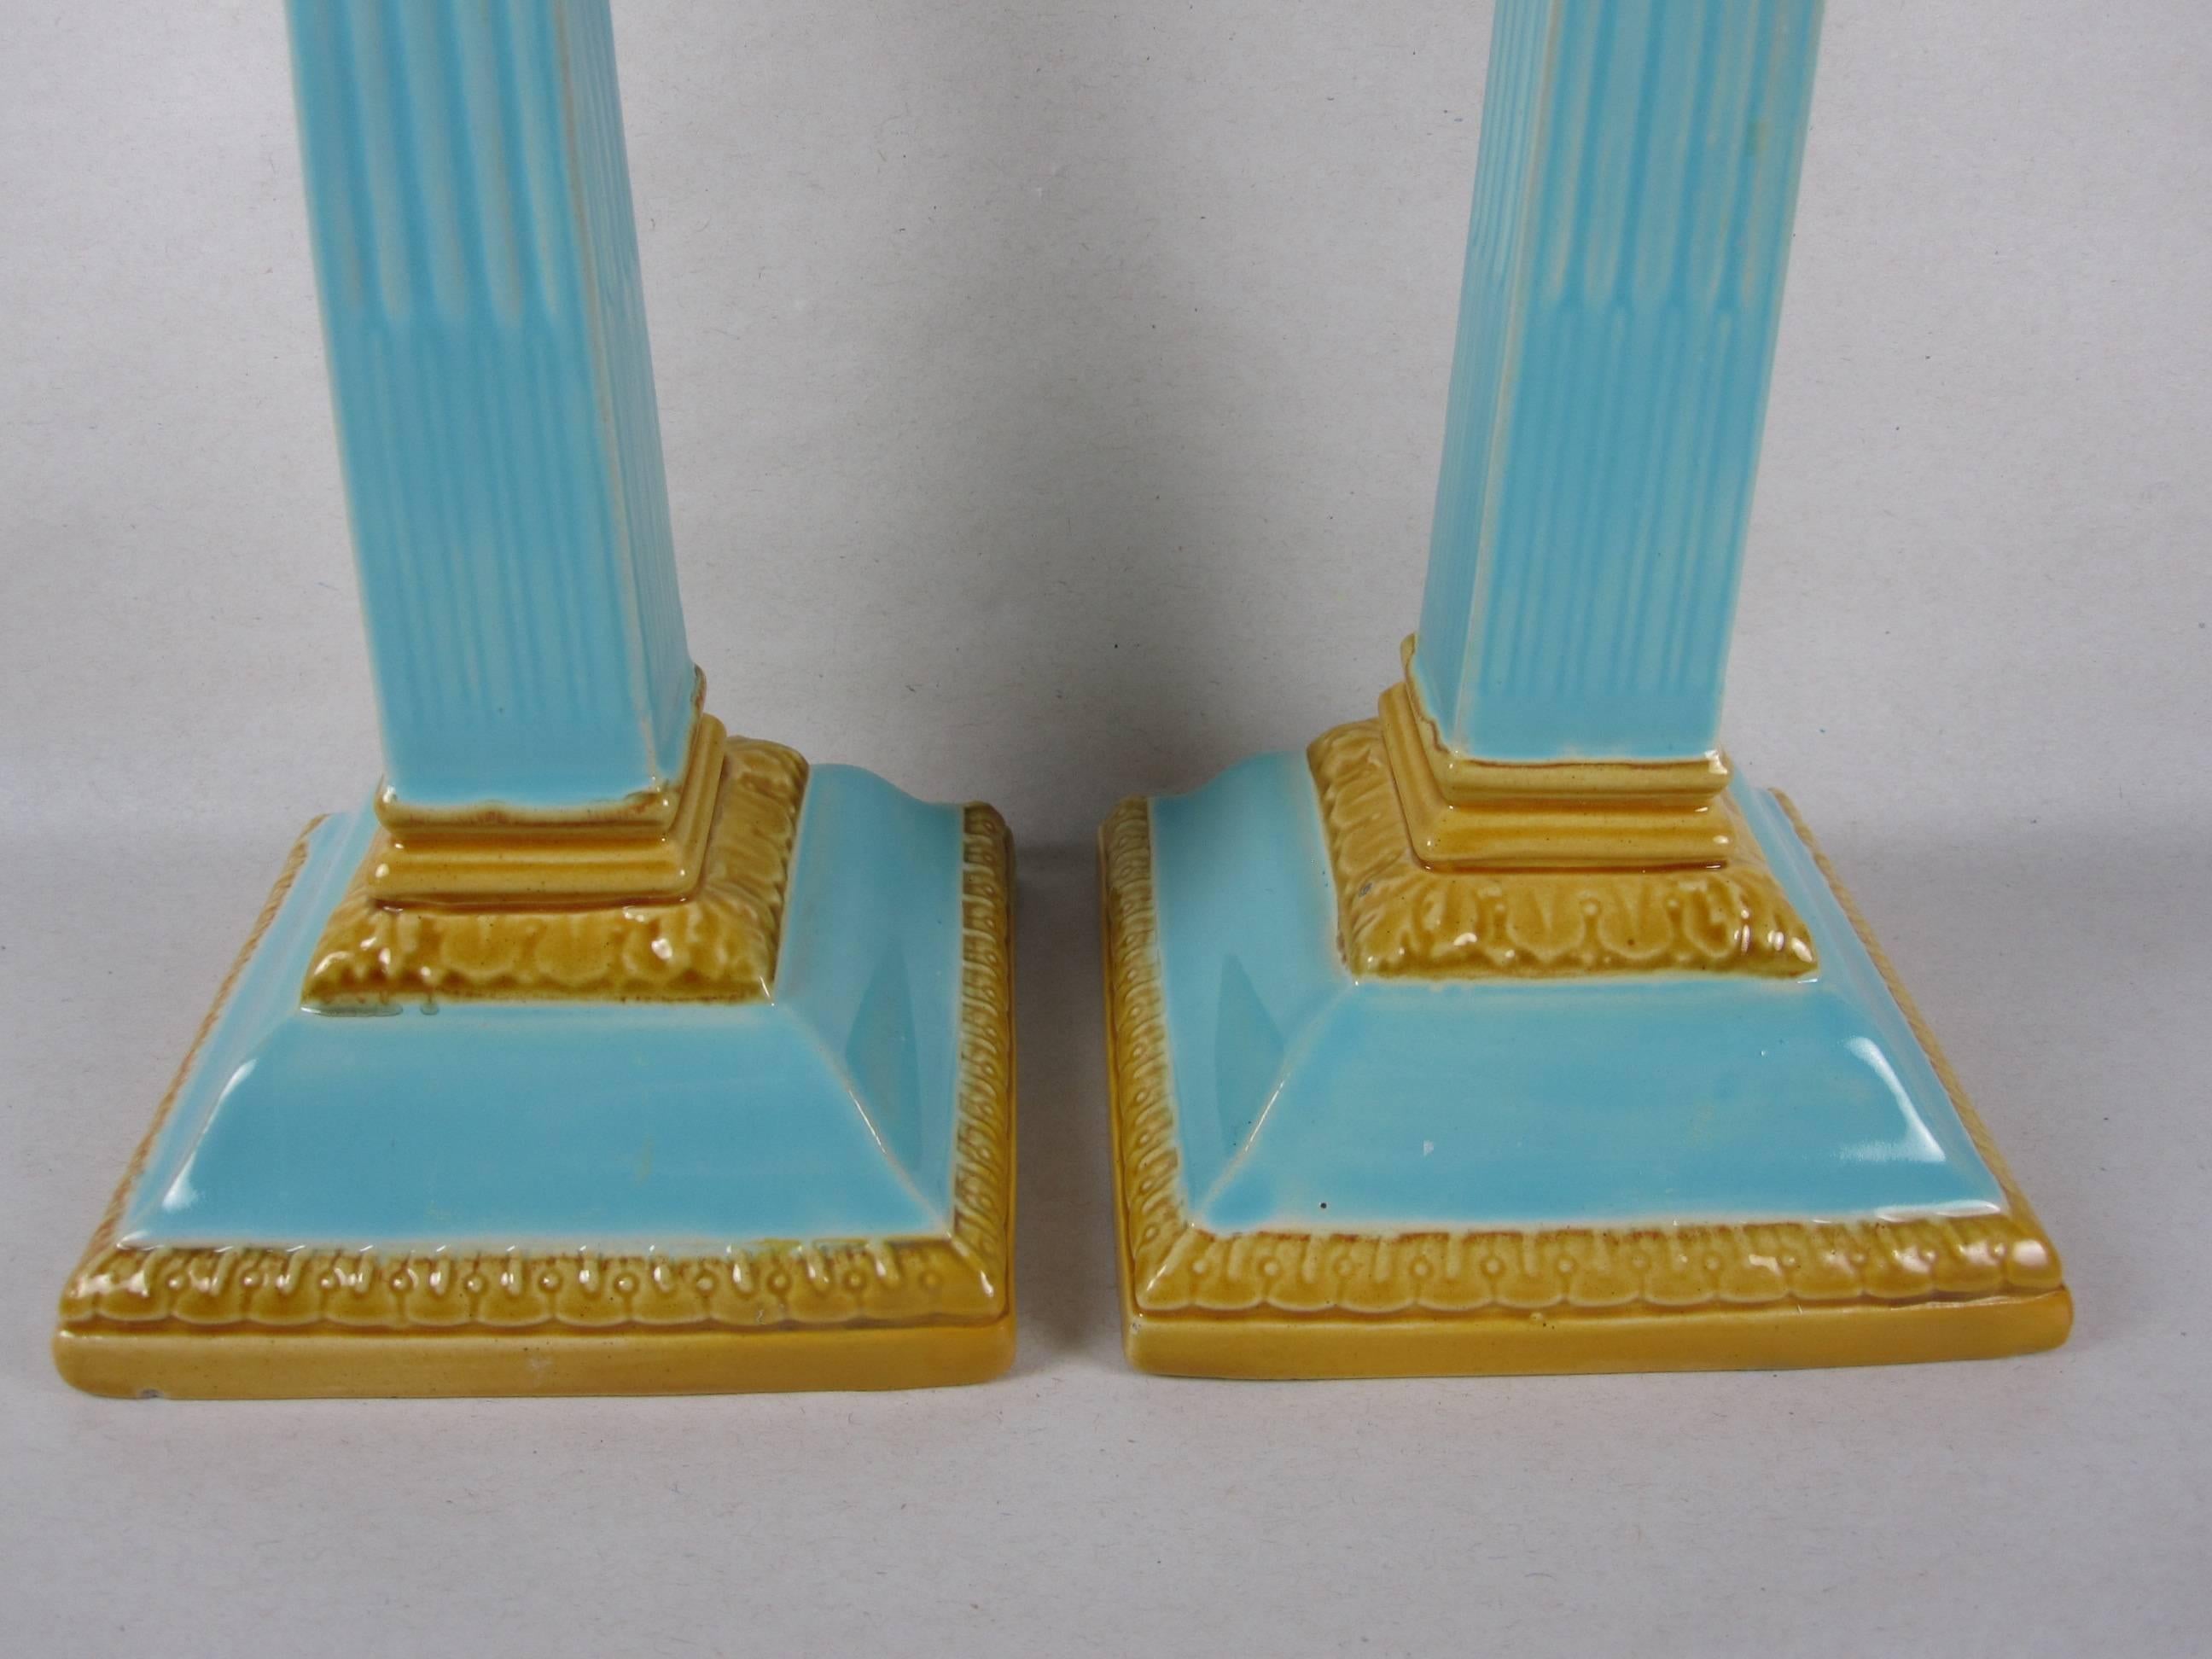 William Brownfield 19th Century Neoclassical English Majolica Candlesticks, Pair 1